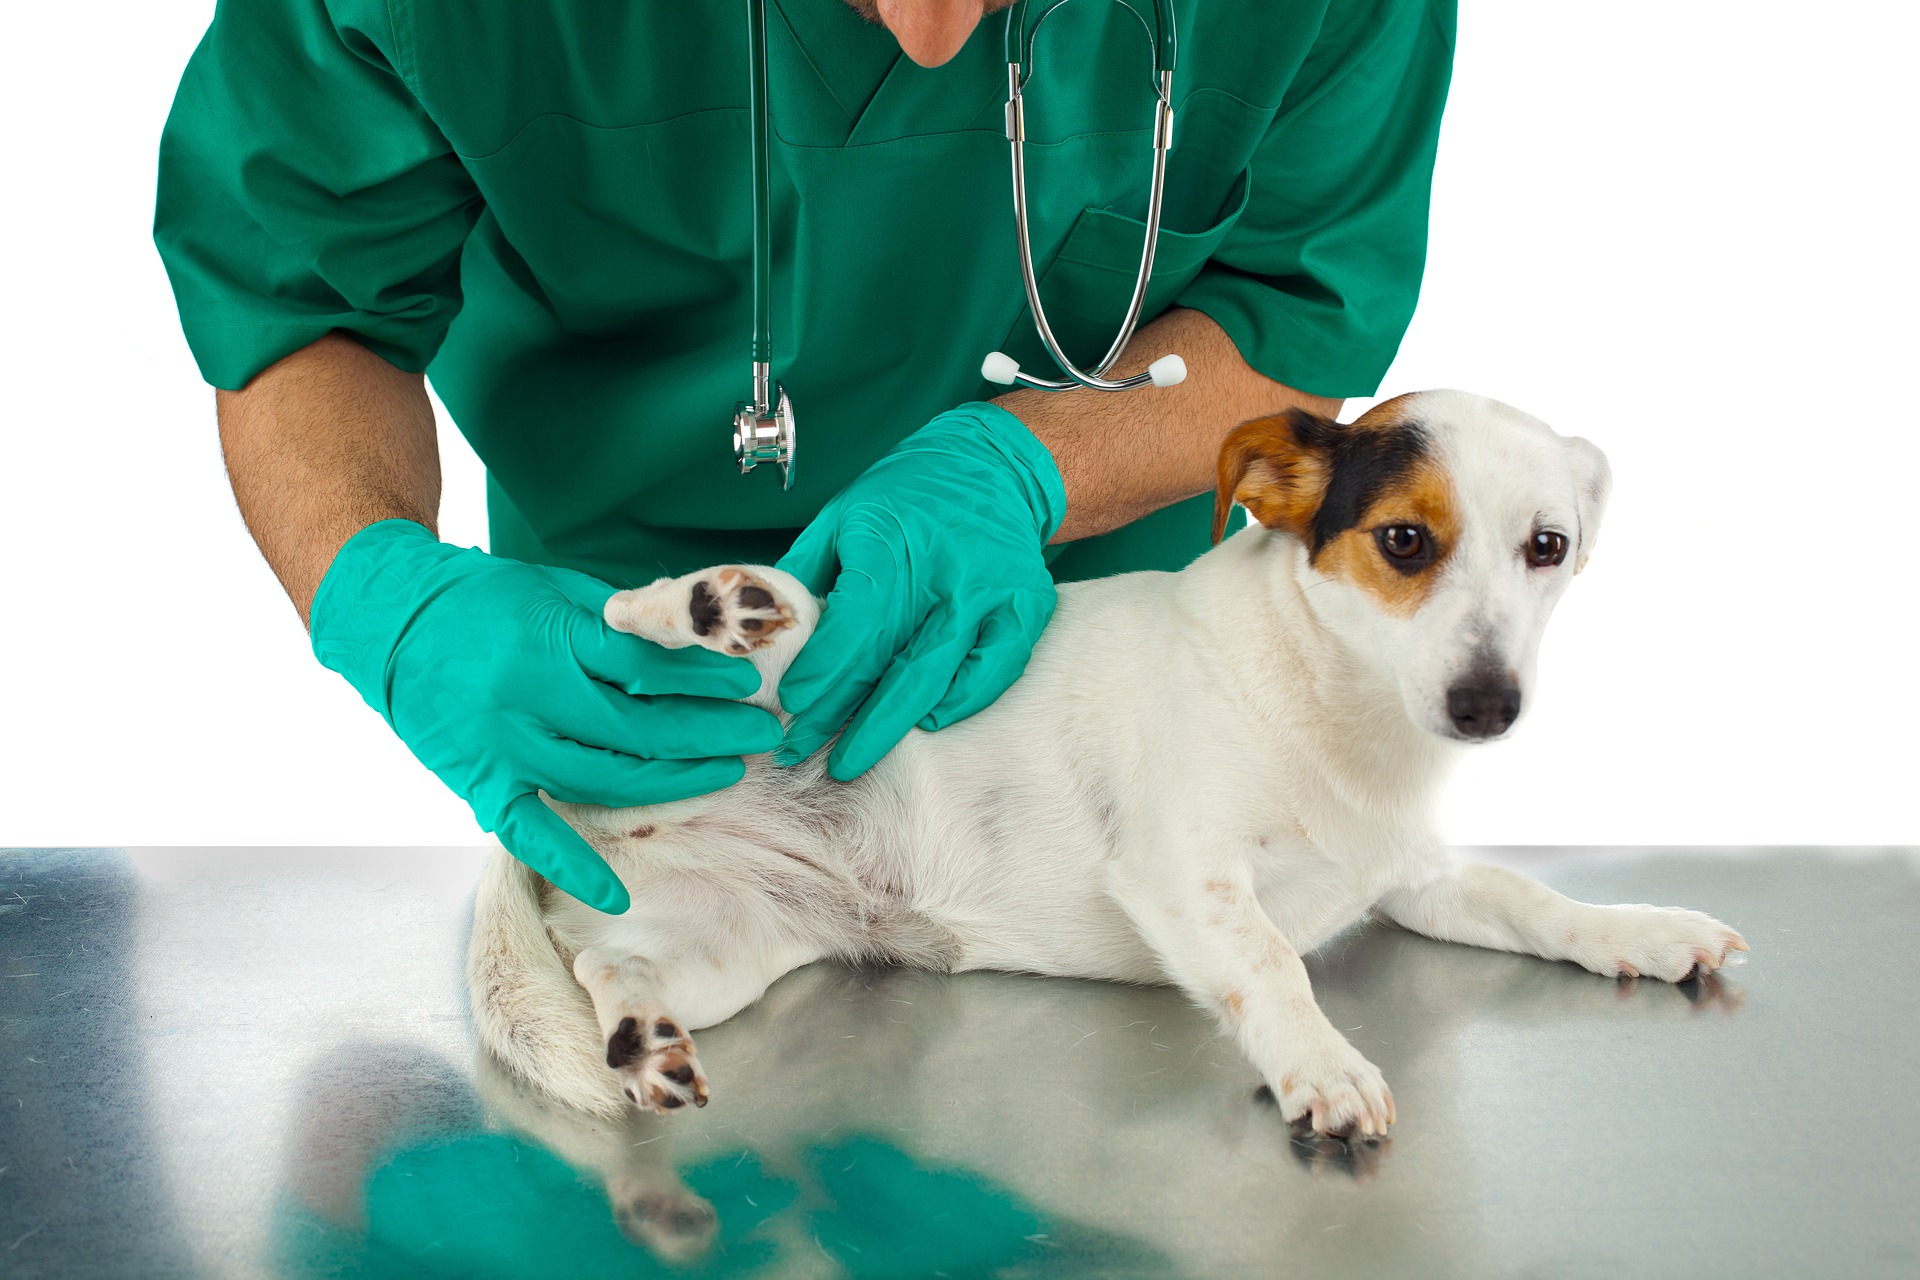 Doctor checking on the dog